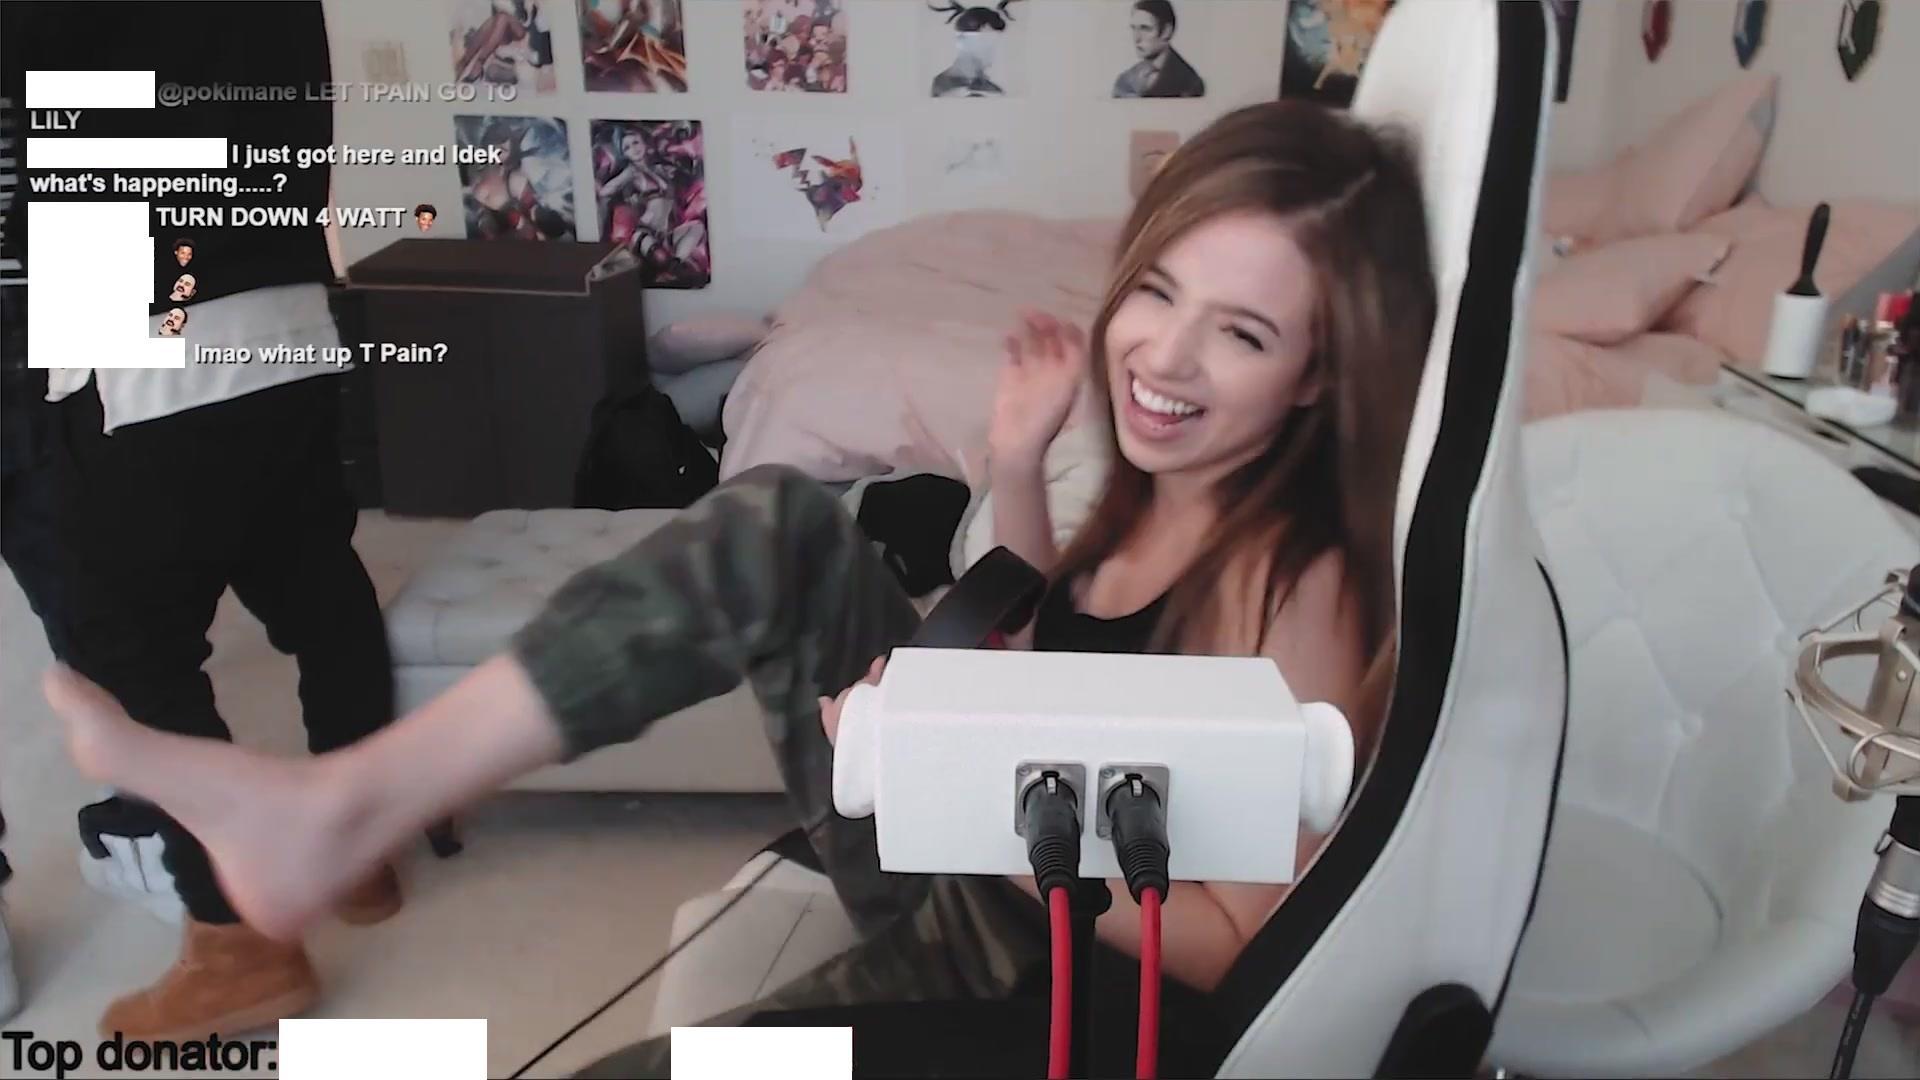 He poses as the fed, a simple editor, and stays with pokimane. 